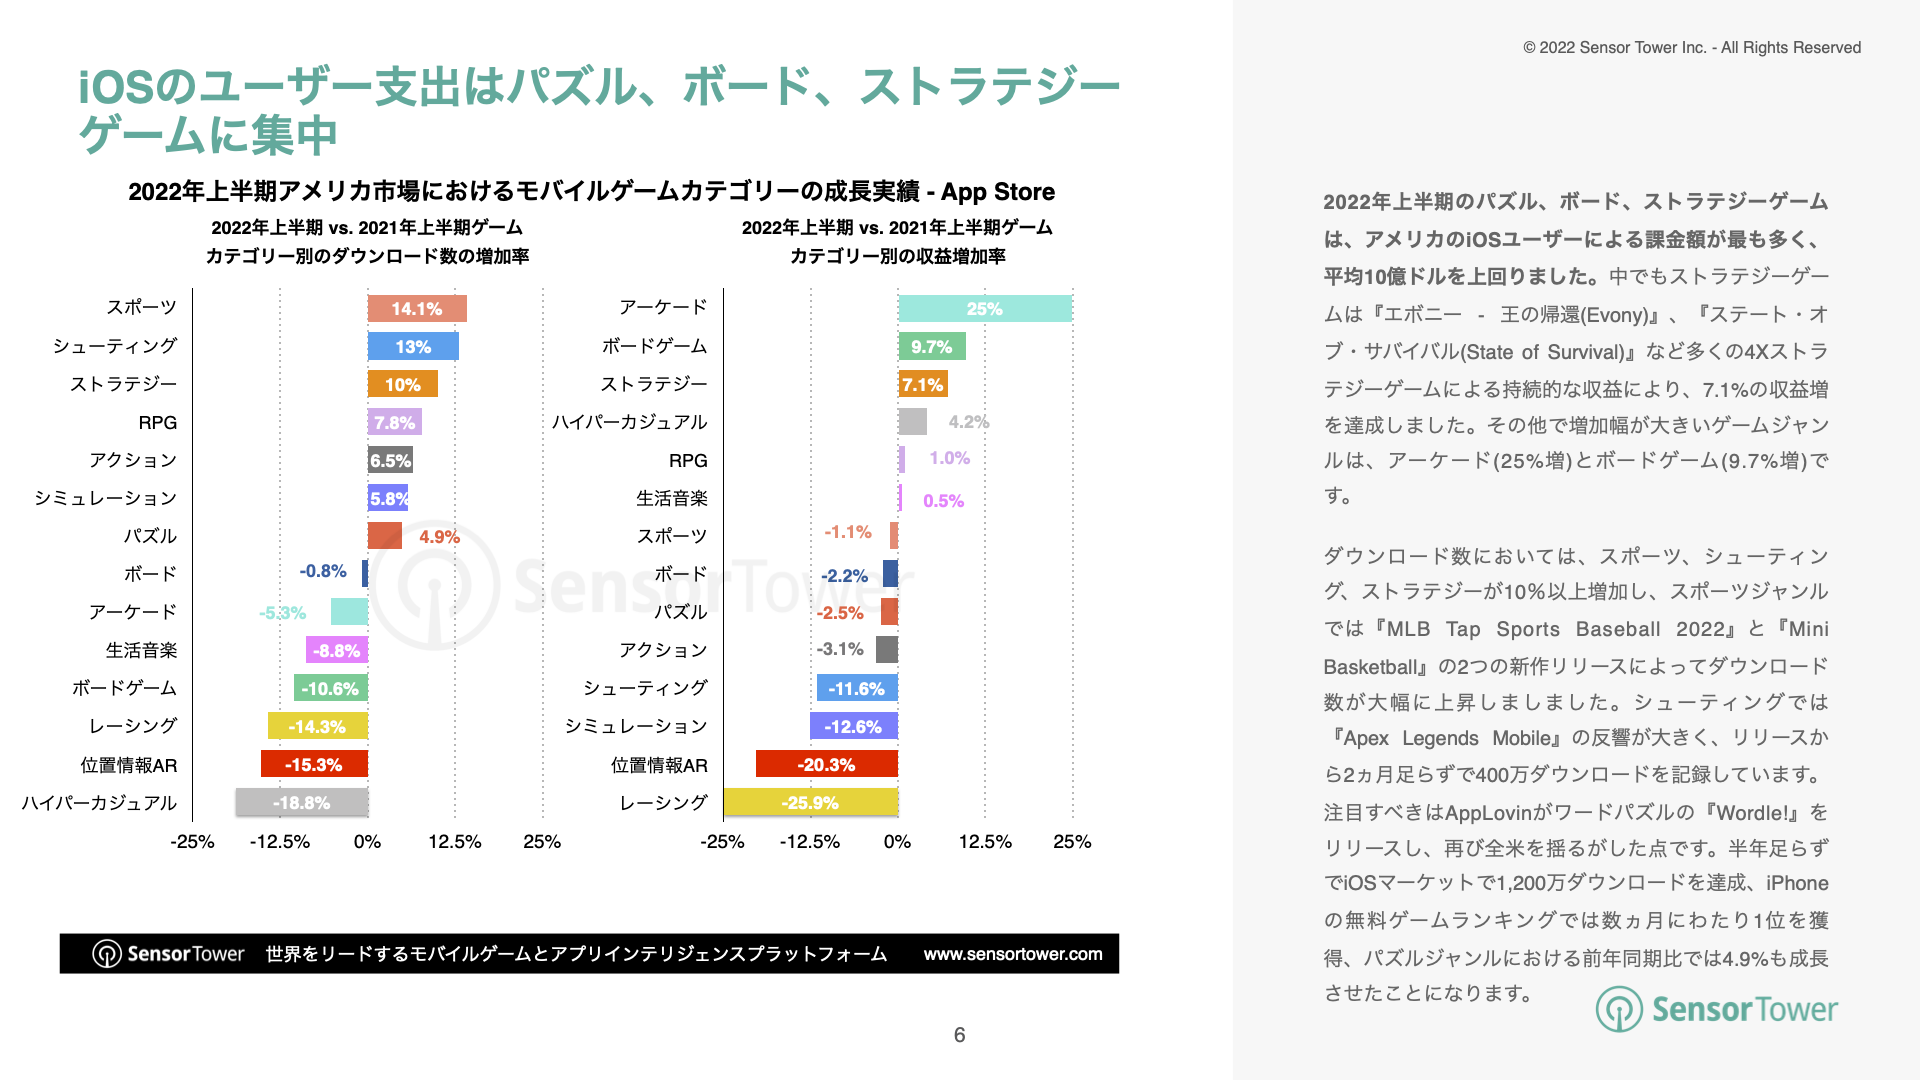 -JP- State of Mobile Games in US 2022H1(pg6)